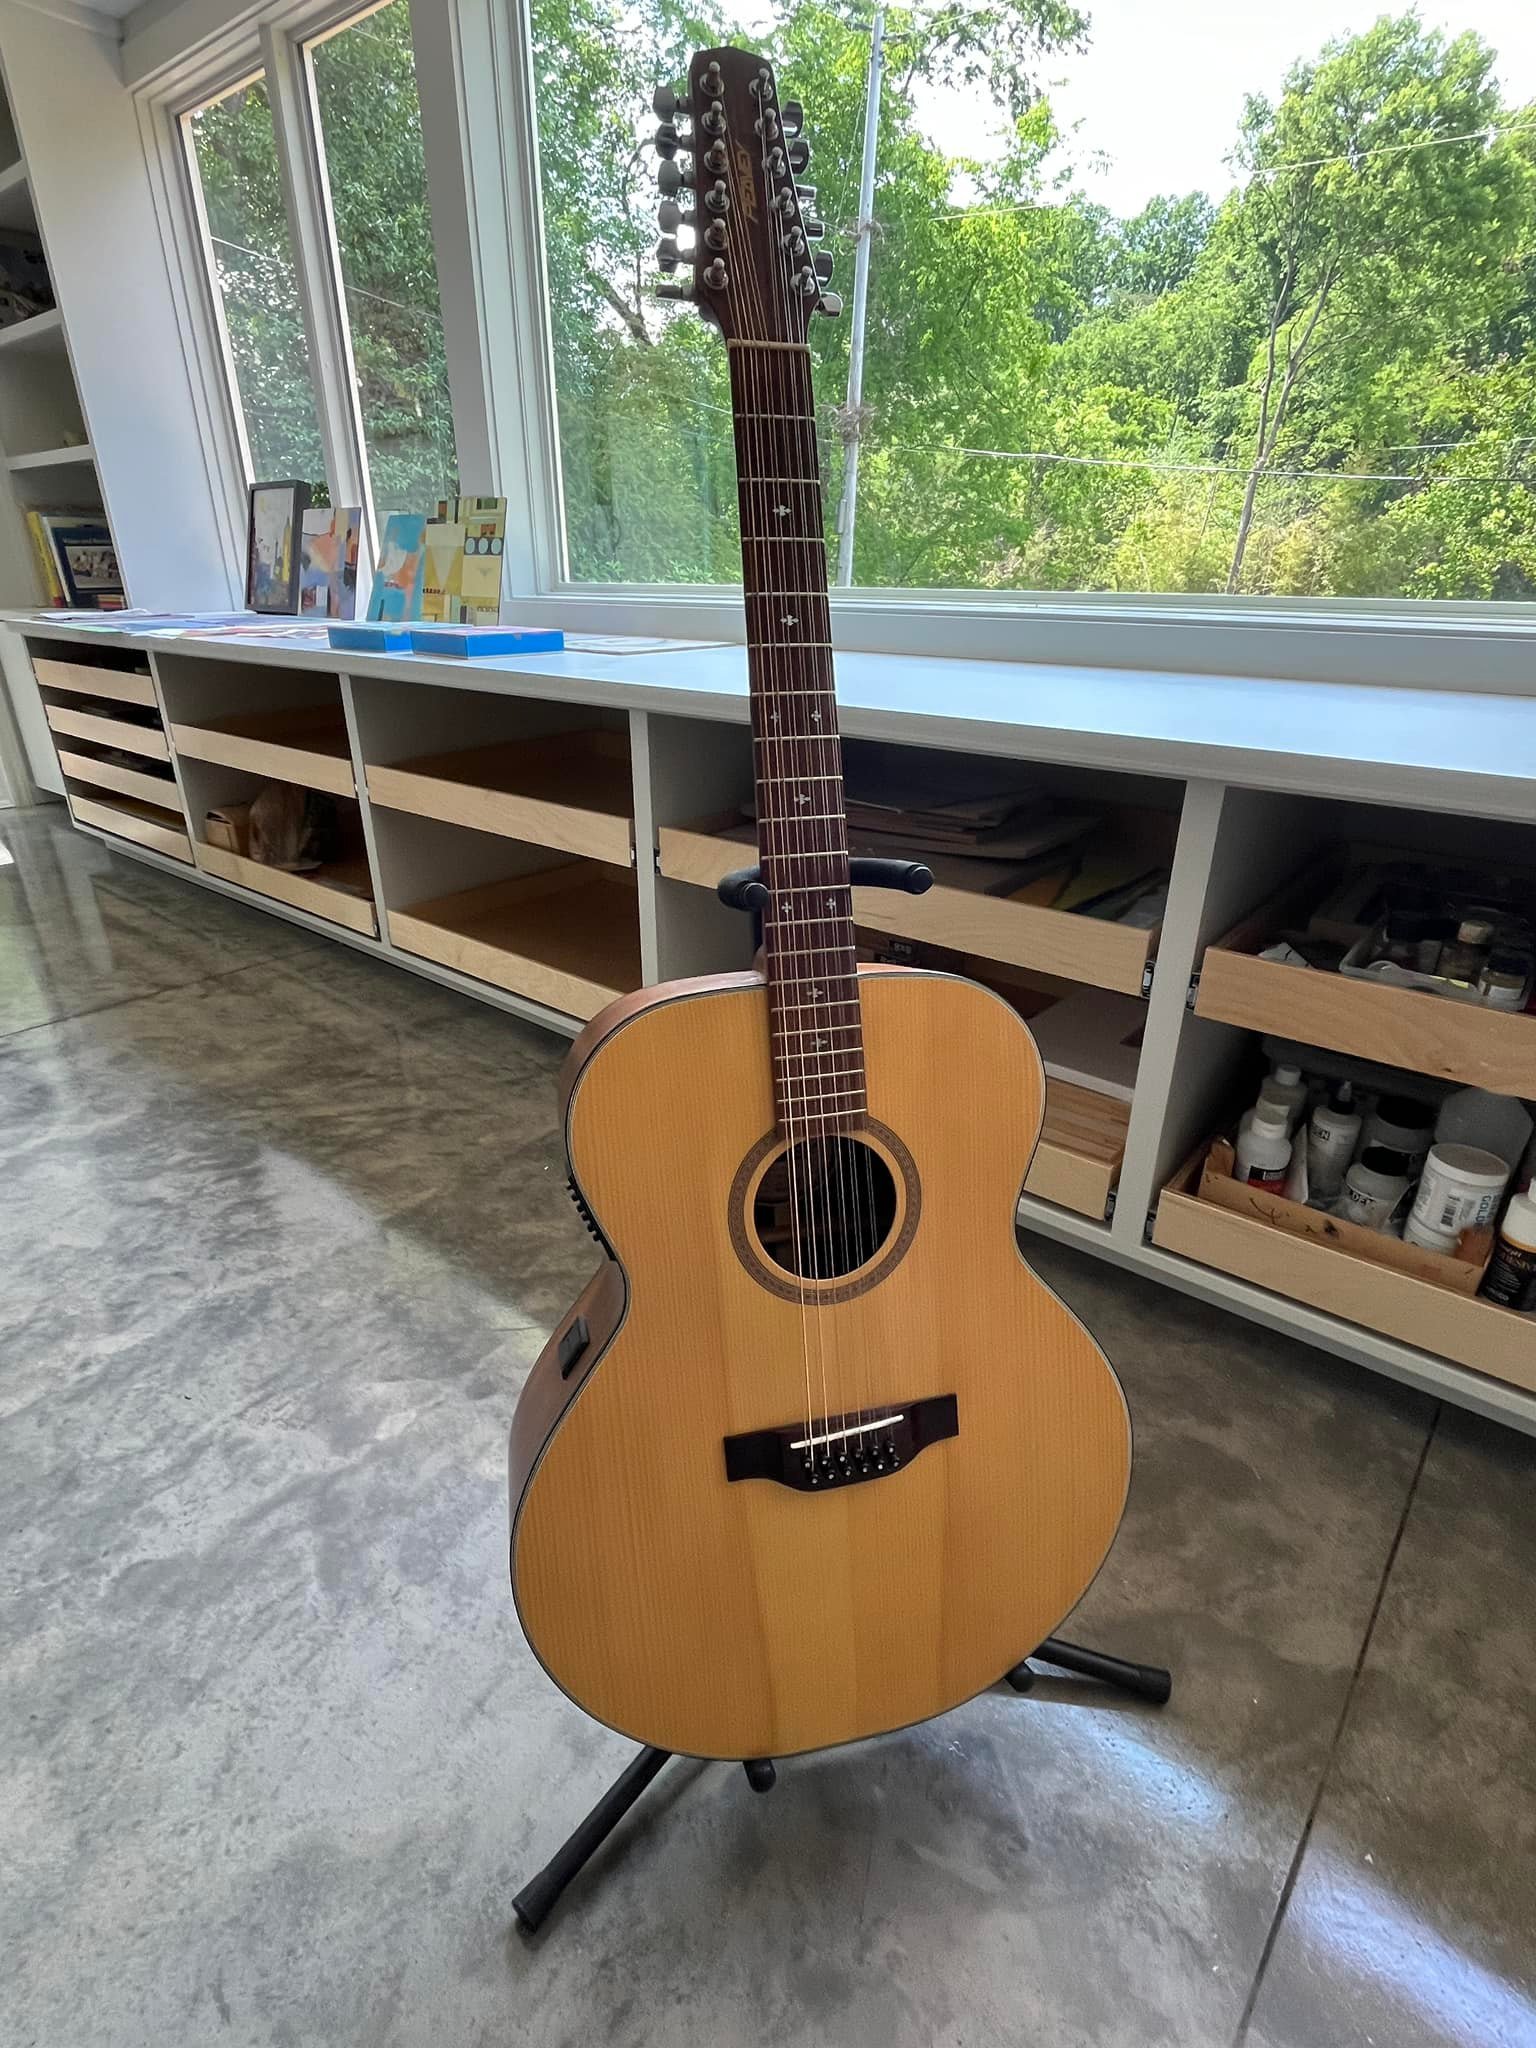 Charlotte -and area- folks / I have a 12-string electric-acoustic guitar in pristine condition ..
comes with a great Epiphone hardshell case. The guitar is a1994 Peavey CJ33-12.  Made in Finland actually.. Peavey had a luthier company there make high